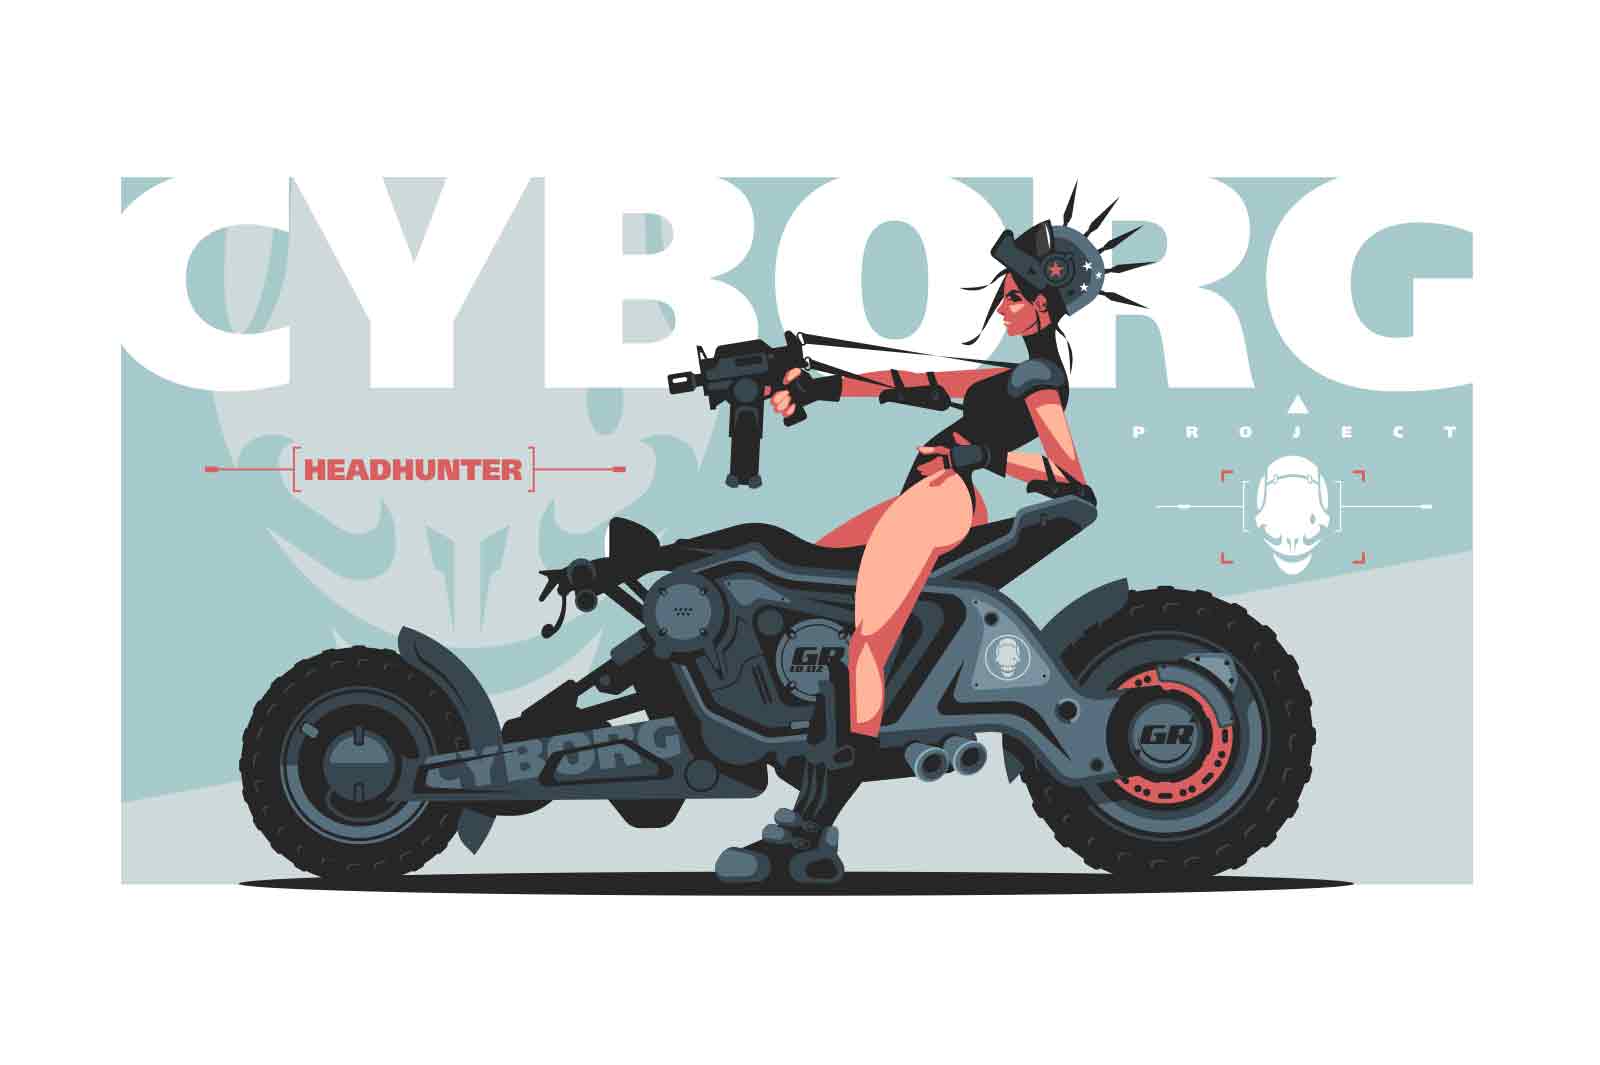 Female cyborg rider or cyberpunk girl on motorbike vector illustration. Girl in exoskeleton with weapons flat concept. Robotic headhunter